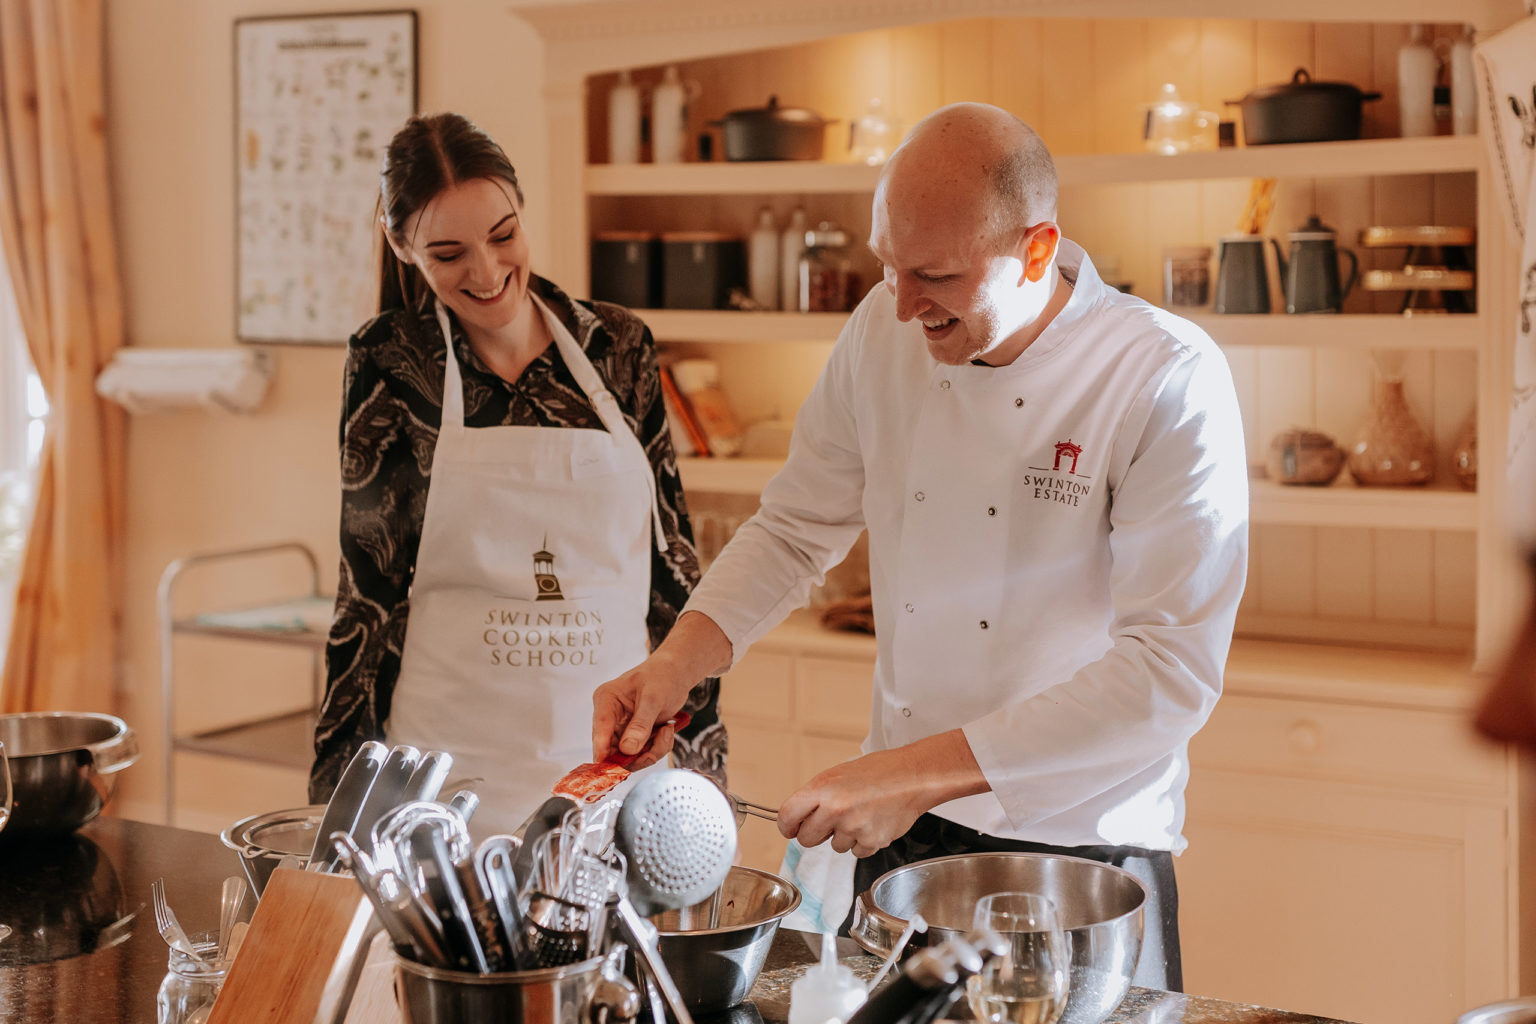 Chef teaching a student during a cookery course at Swinton Cookery School near Harrogate in Yorkshire